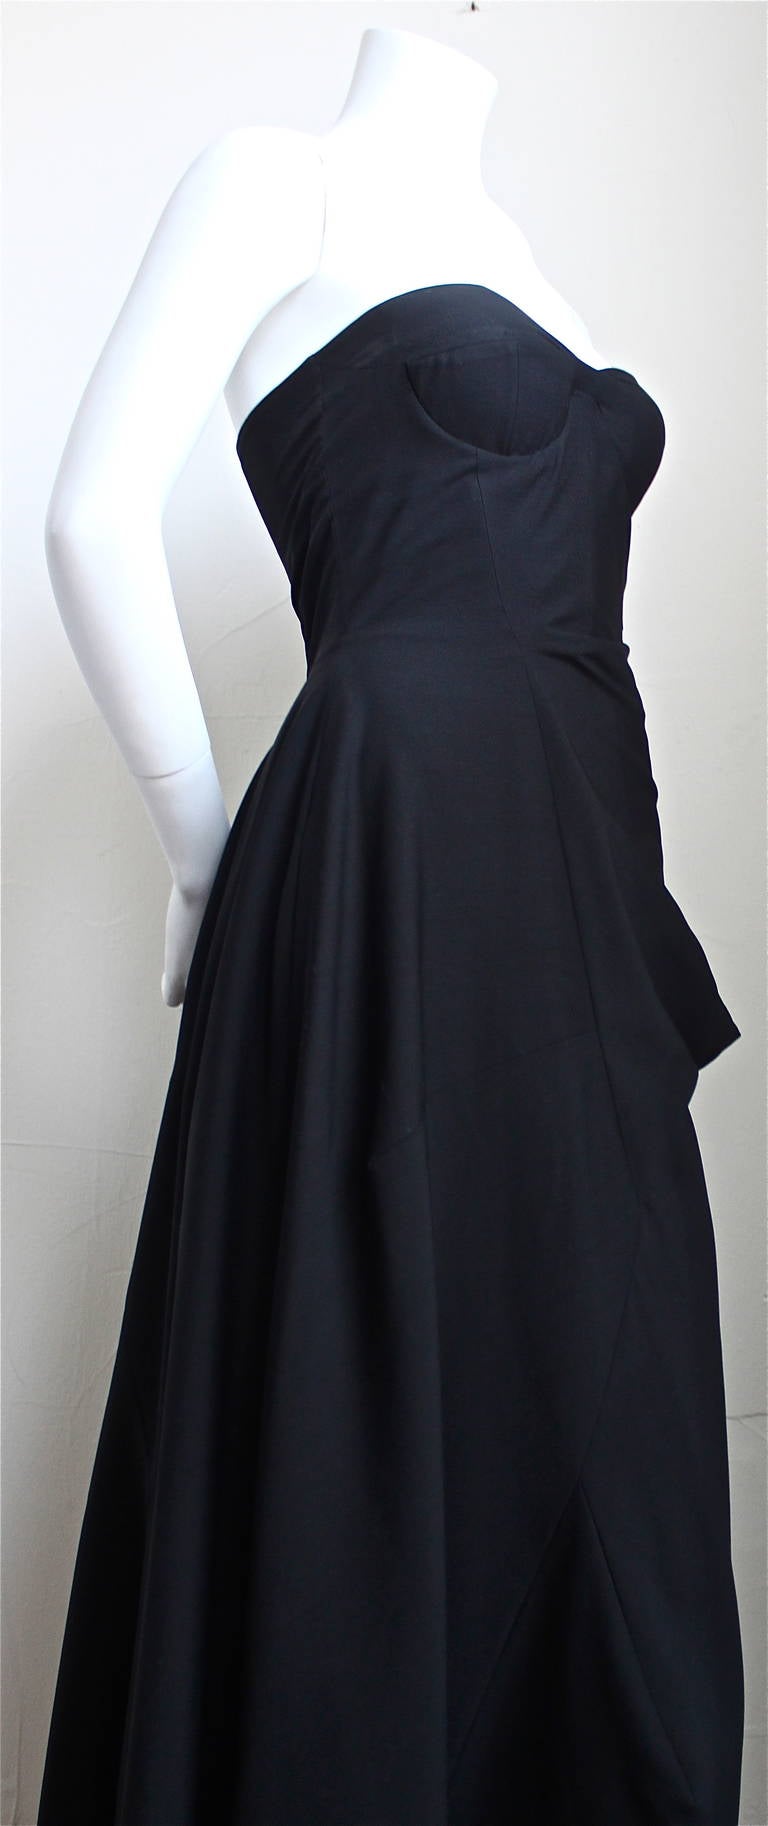 RAF SIMONS for JIL SANDER black strapless runway finale dress - 2012 In Excellent Condition In San Fransisco, CA